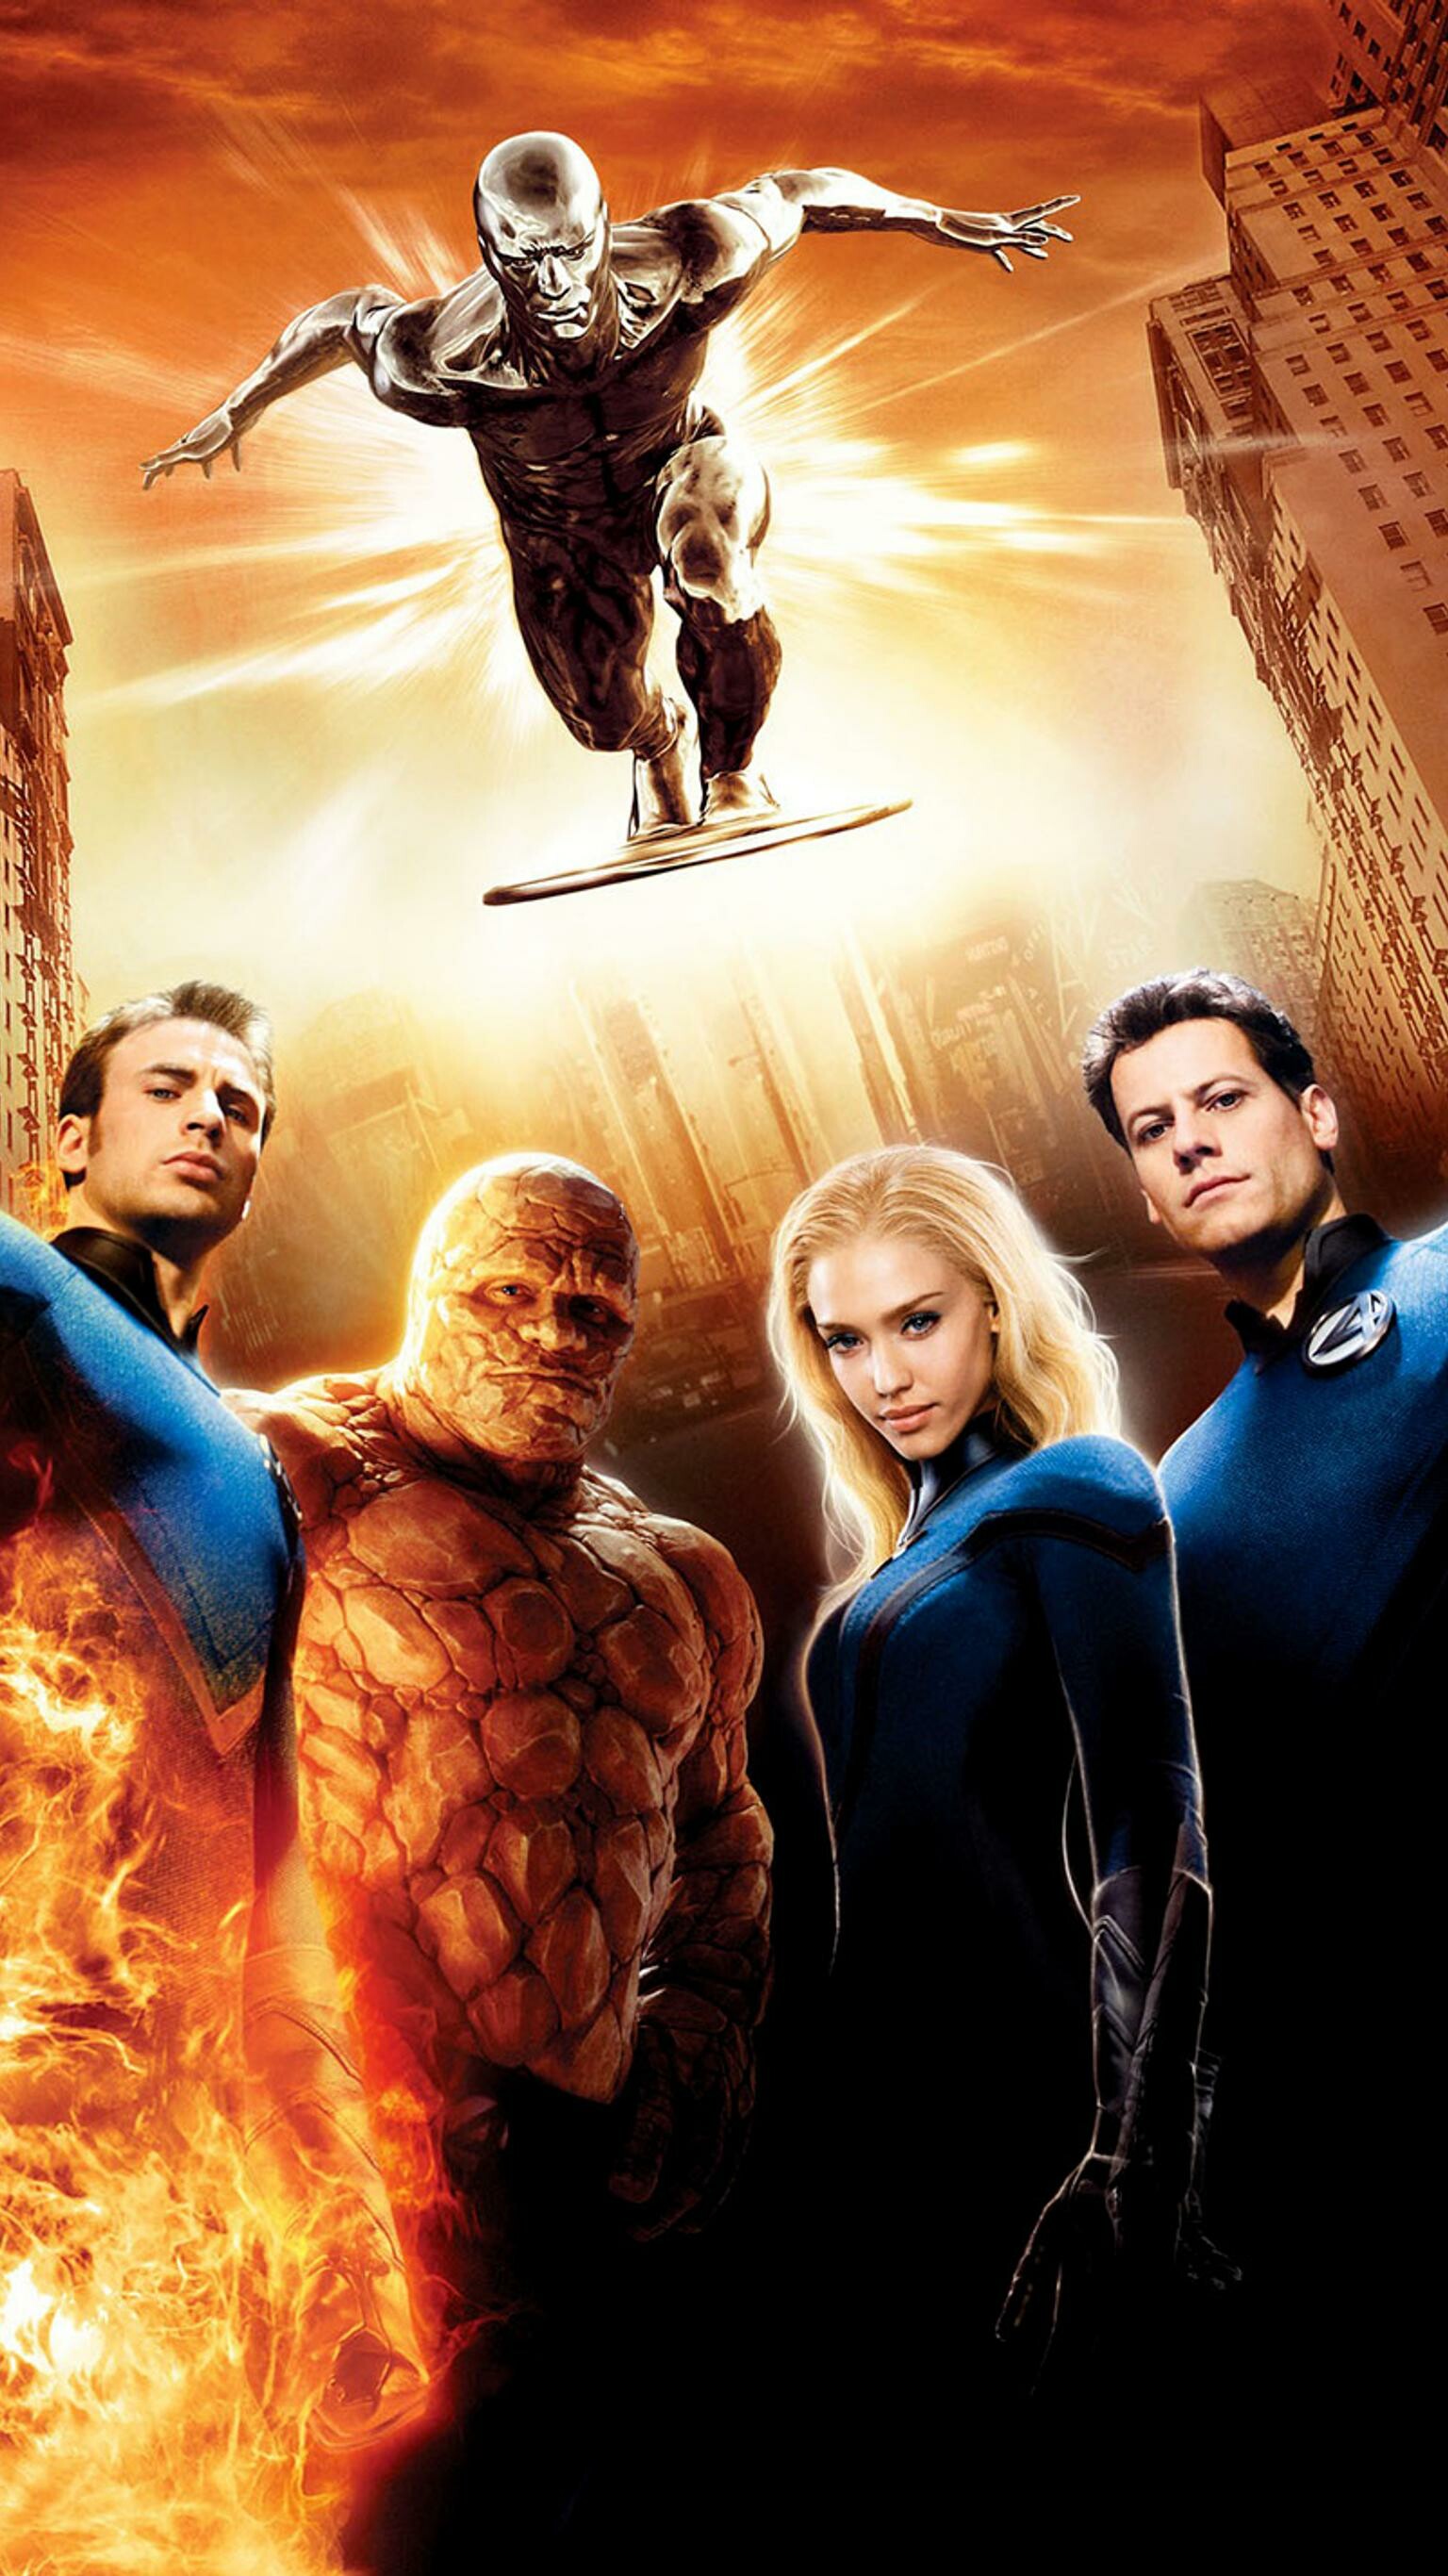 Fantastic 4: Four young outsiders gain superhuman powers as they alter their physical form in shocking ways. 1540x2740 HD Wallpaper.